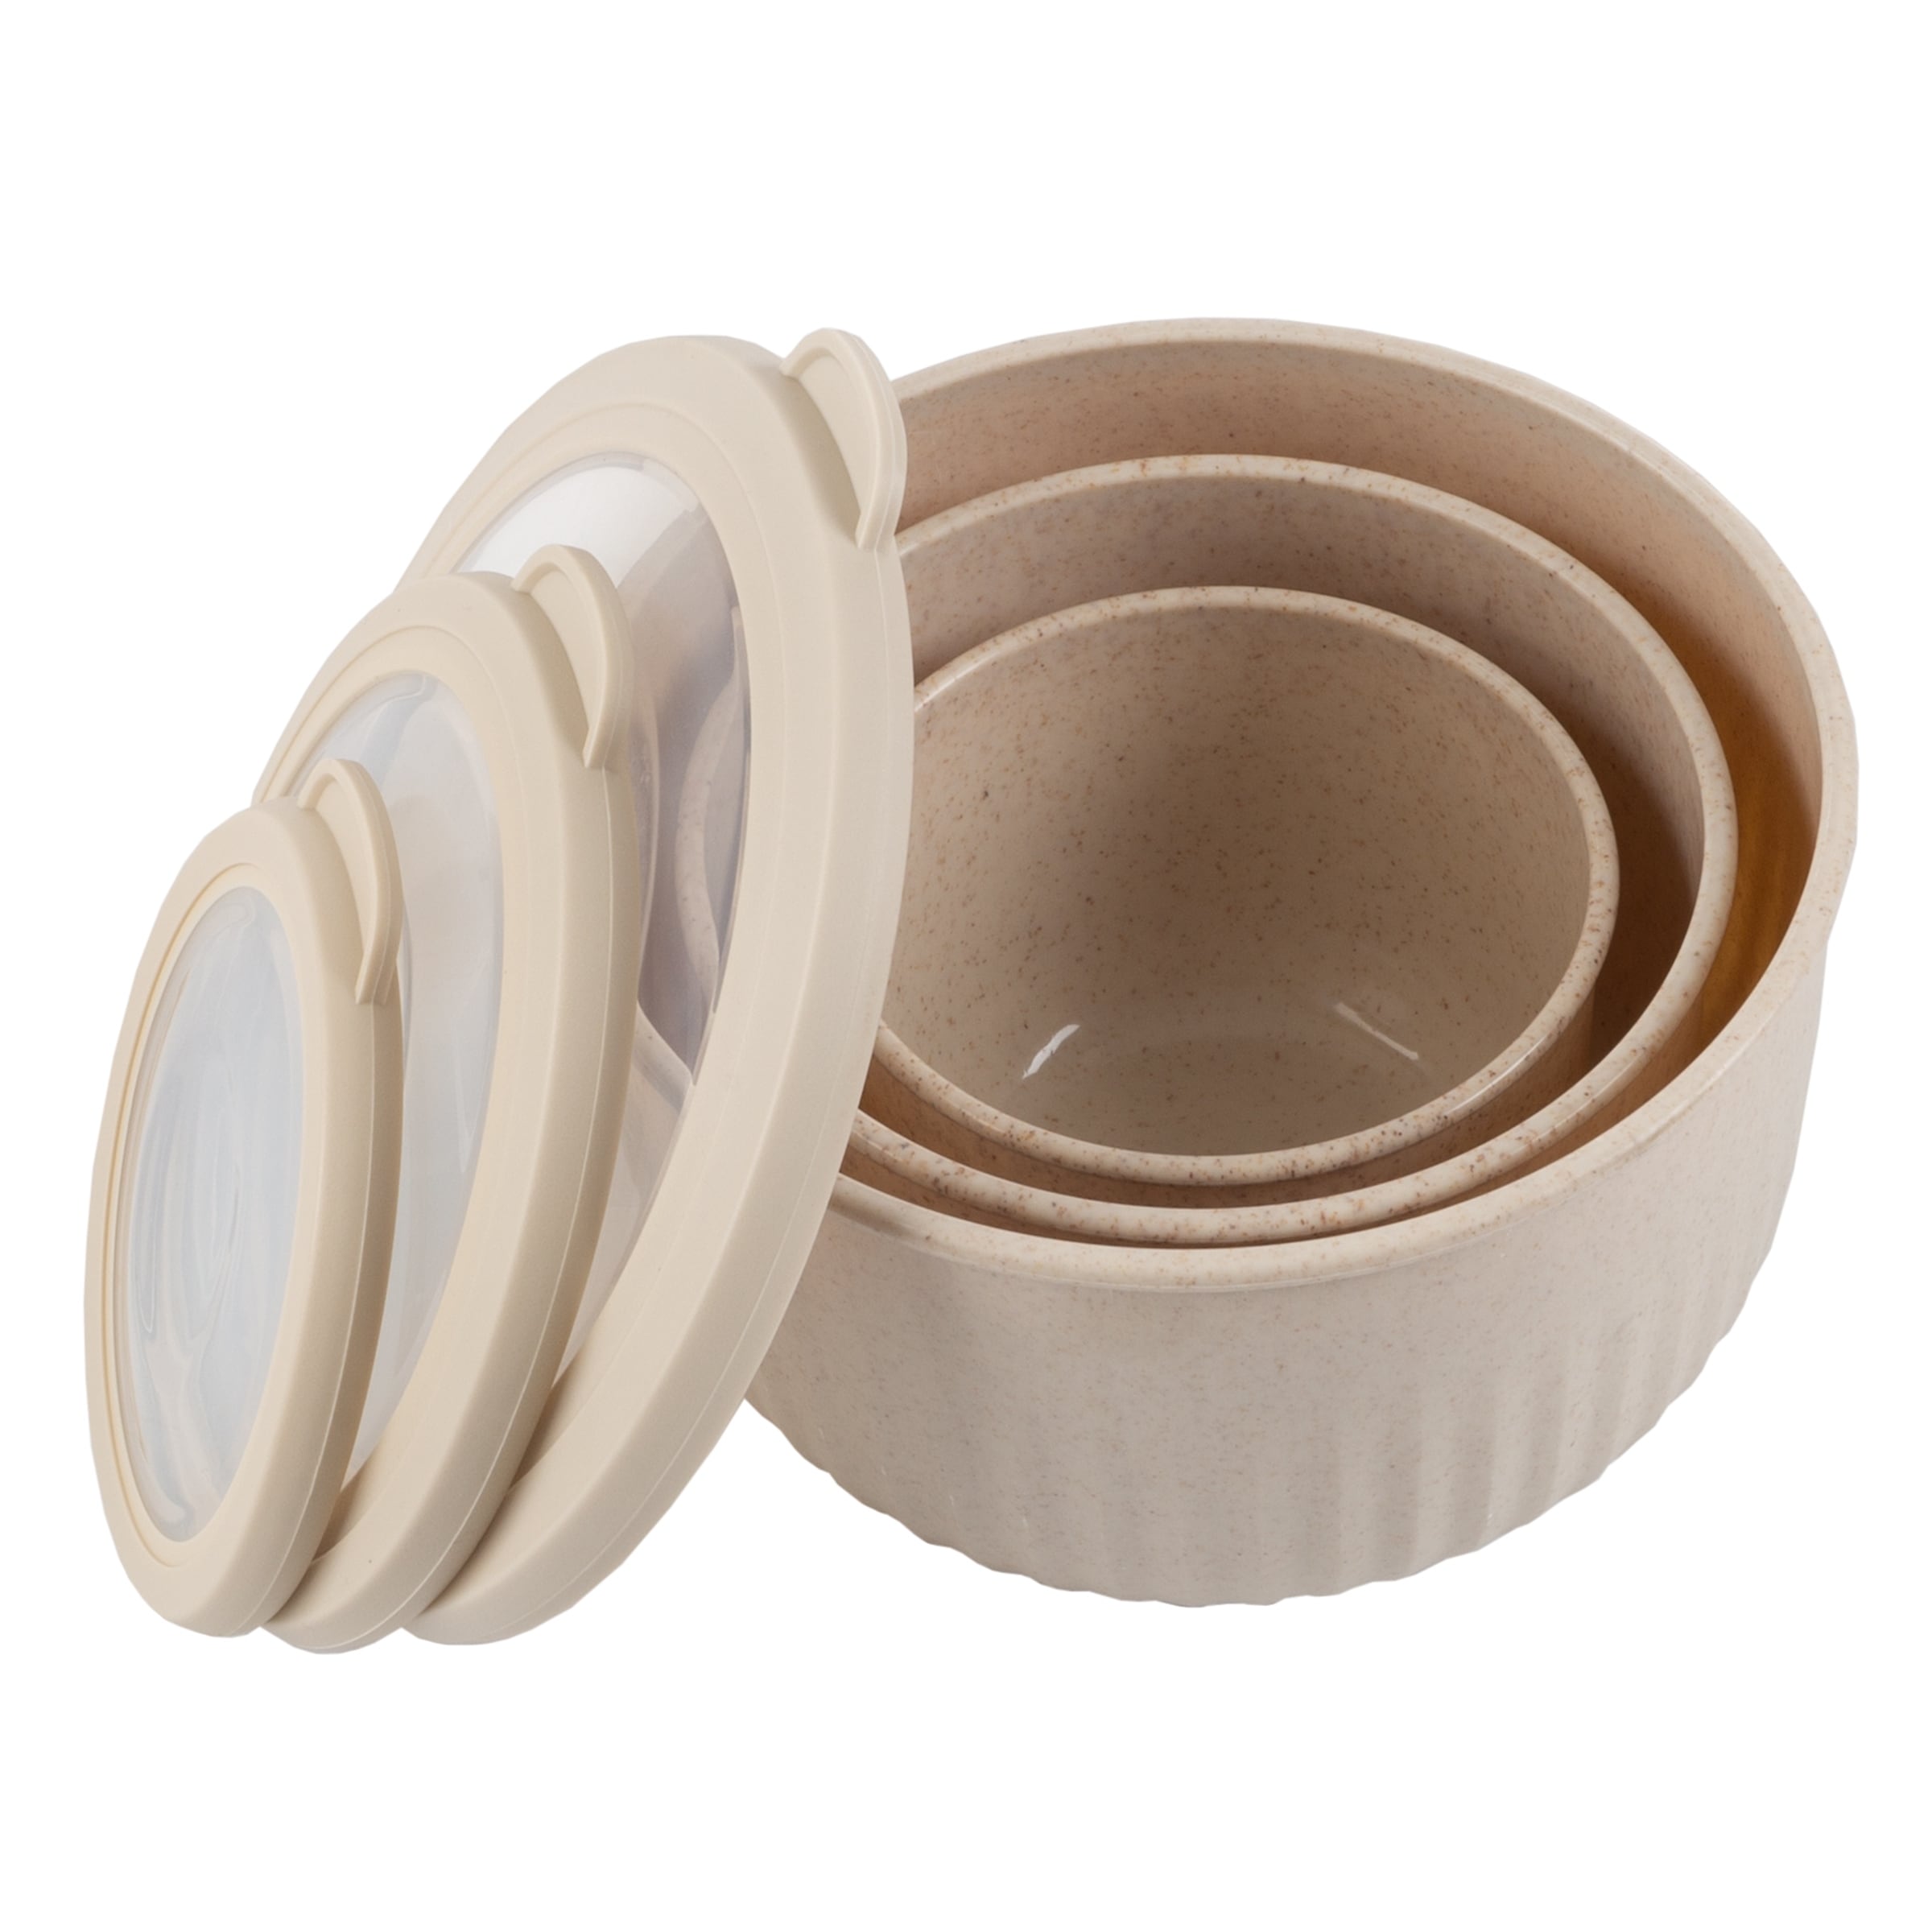 https://ak1.ostkcdn.com/images/products/is/images/direct/c756a99df68280a15bea52e2925be3760dda8b7c/Set-of-3-Bowls-with-Lids---Eco-Conscious-Kitchen-Essentials-by-Classic-Cuisine.jpg